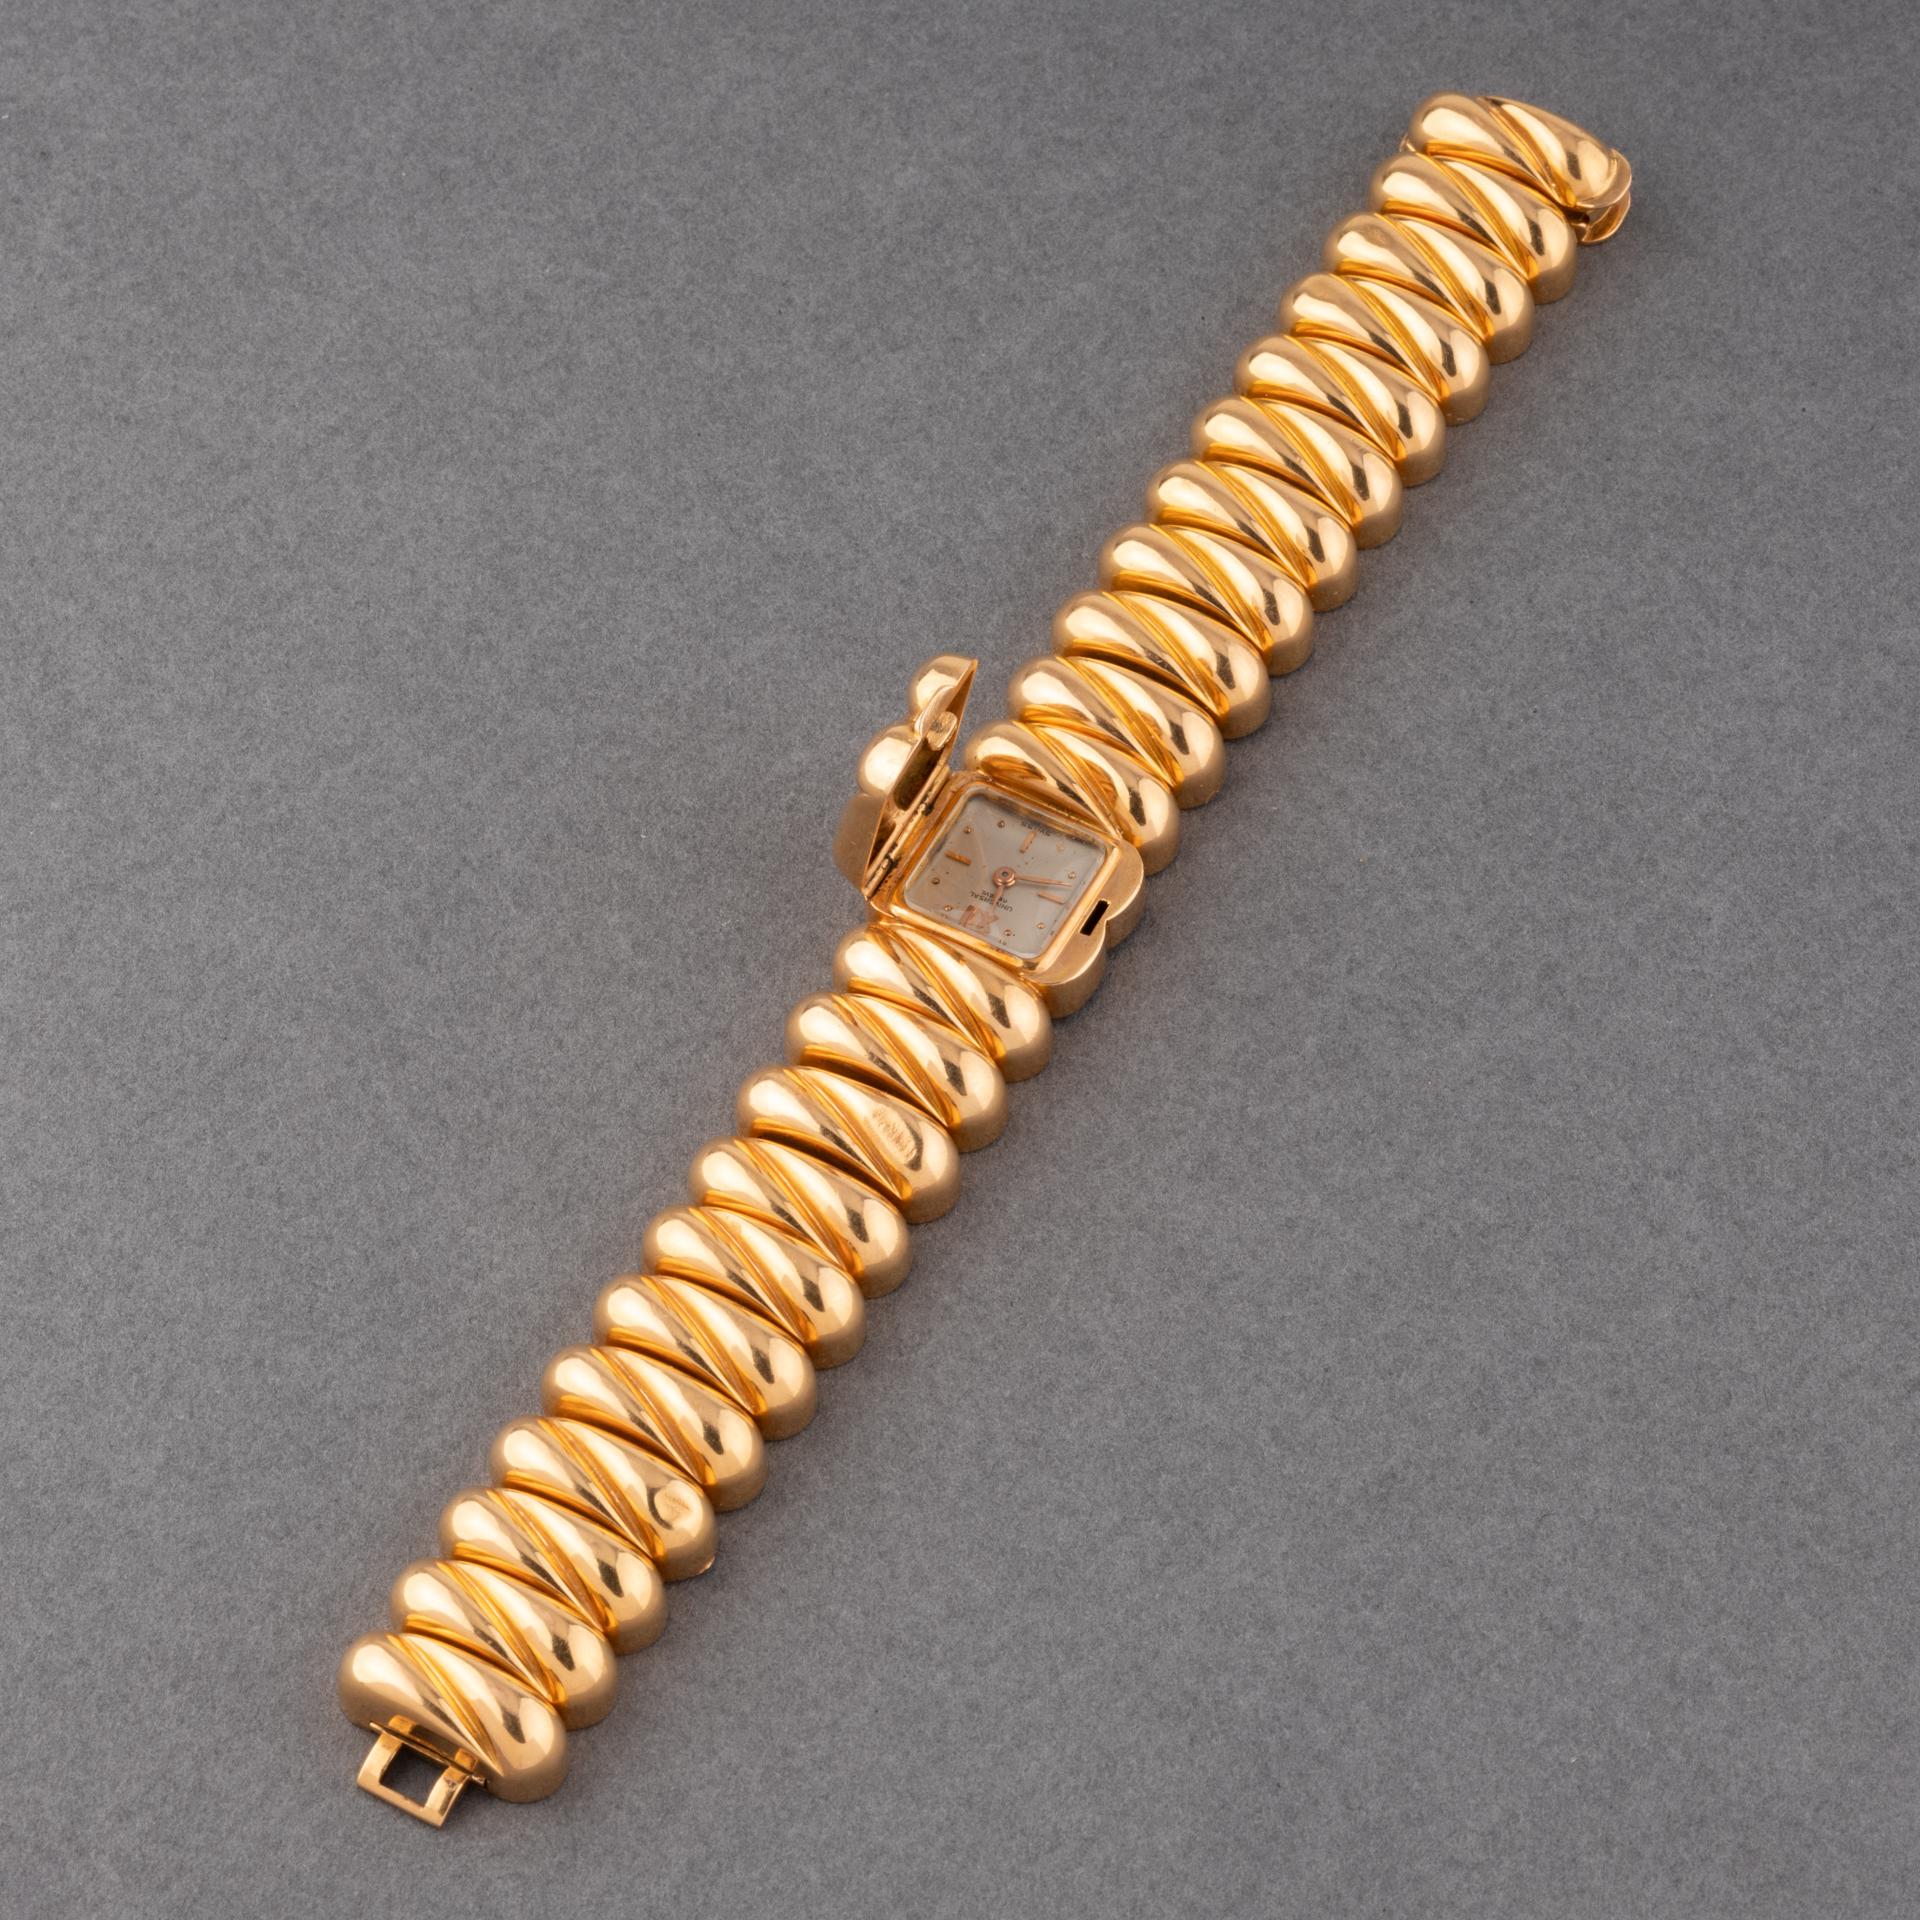 A lovely rétro watch bracelet, made by Universal Genève circa 1950.
Made in yellow gold 18k, 17.5 cm length. Signed and Hallmarked.
The weight is 64.5 grams.
The width is 19mm.